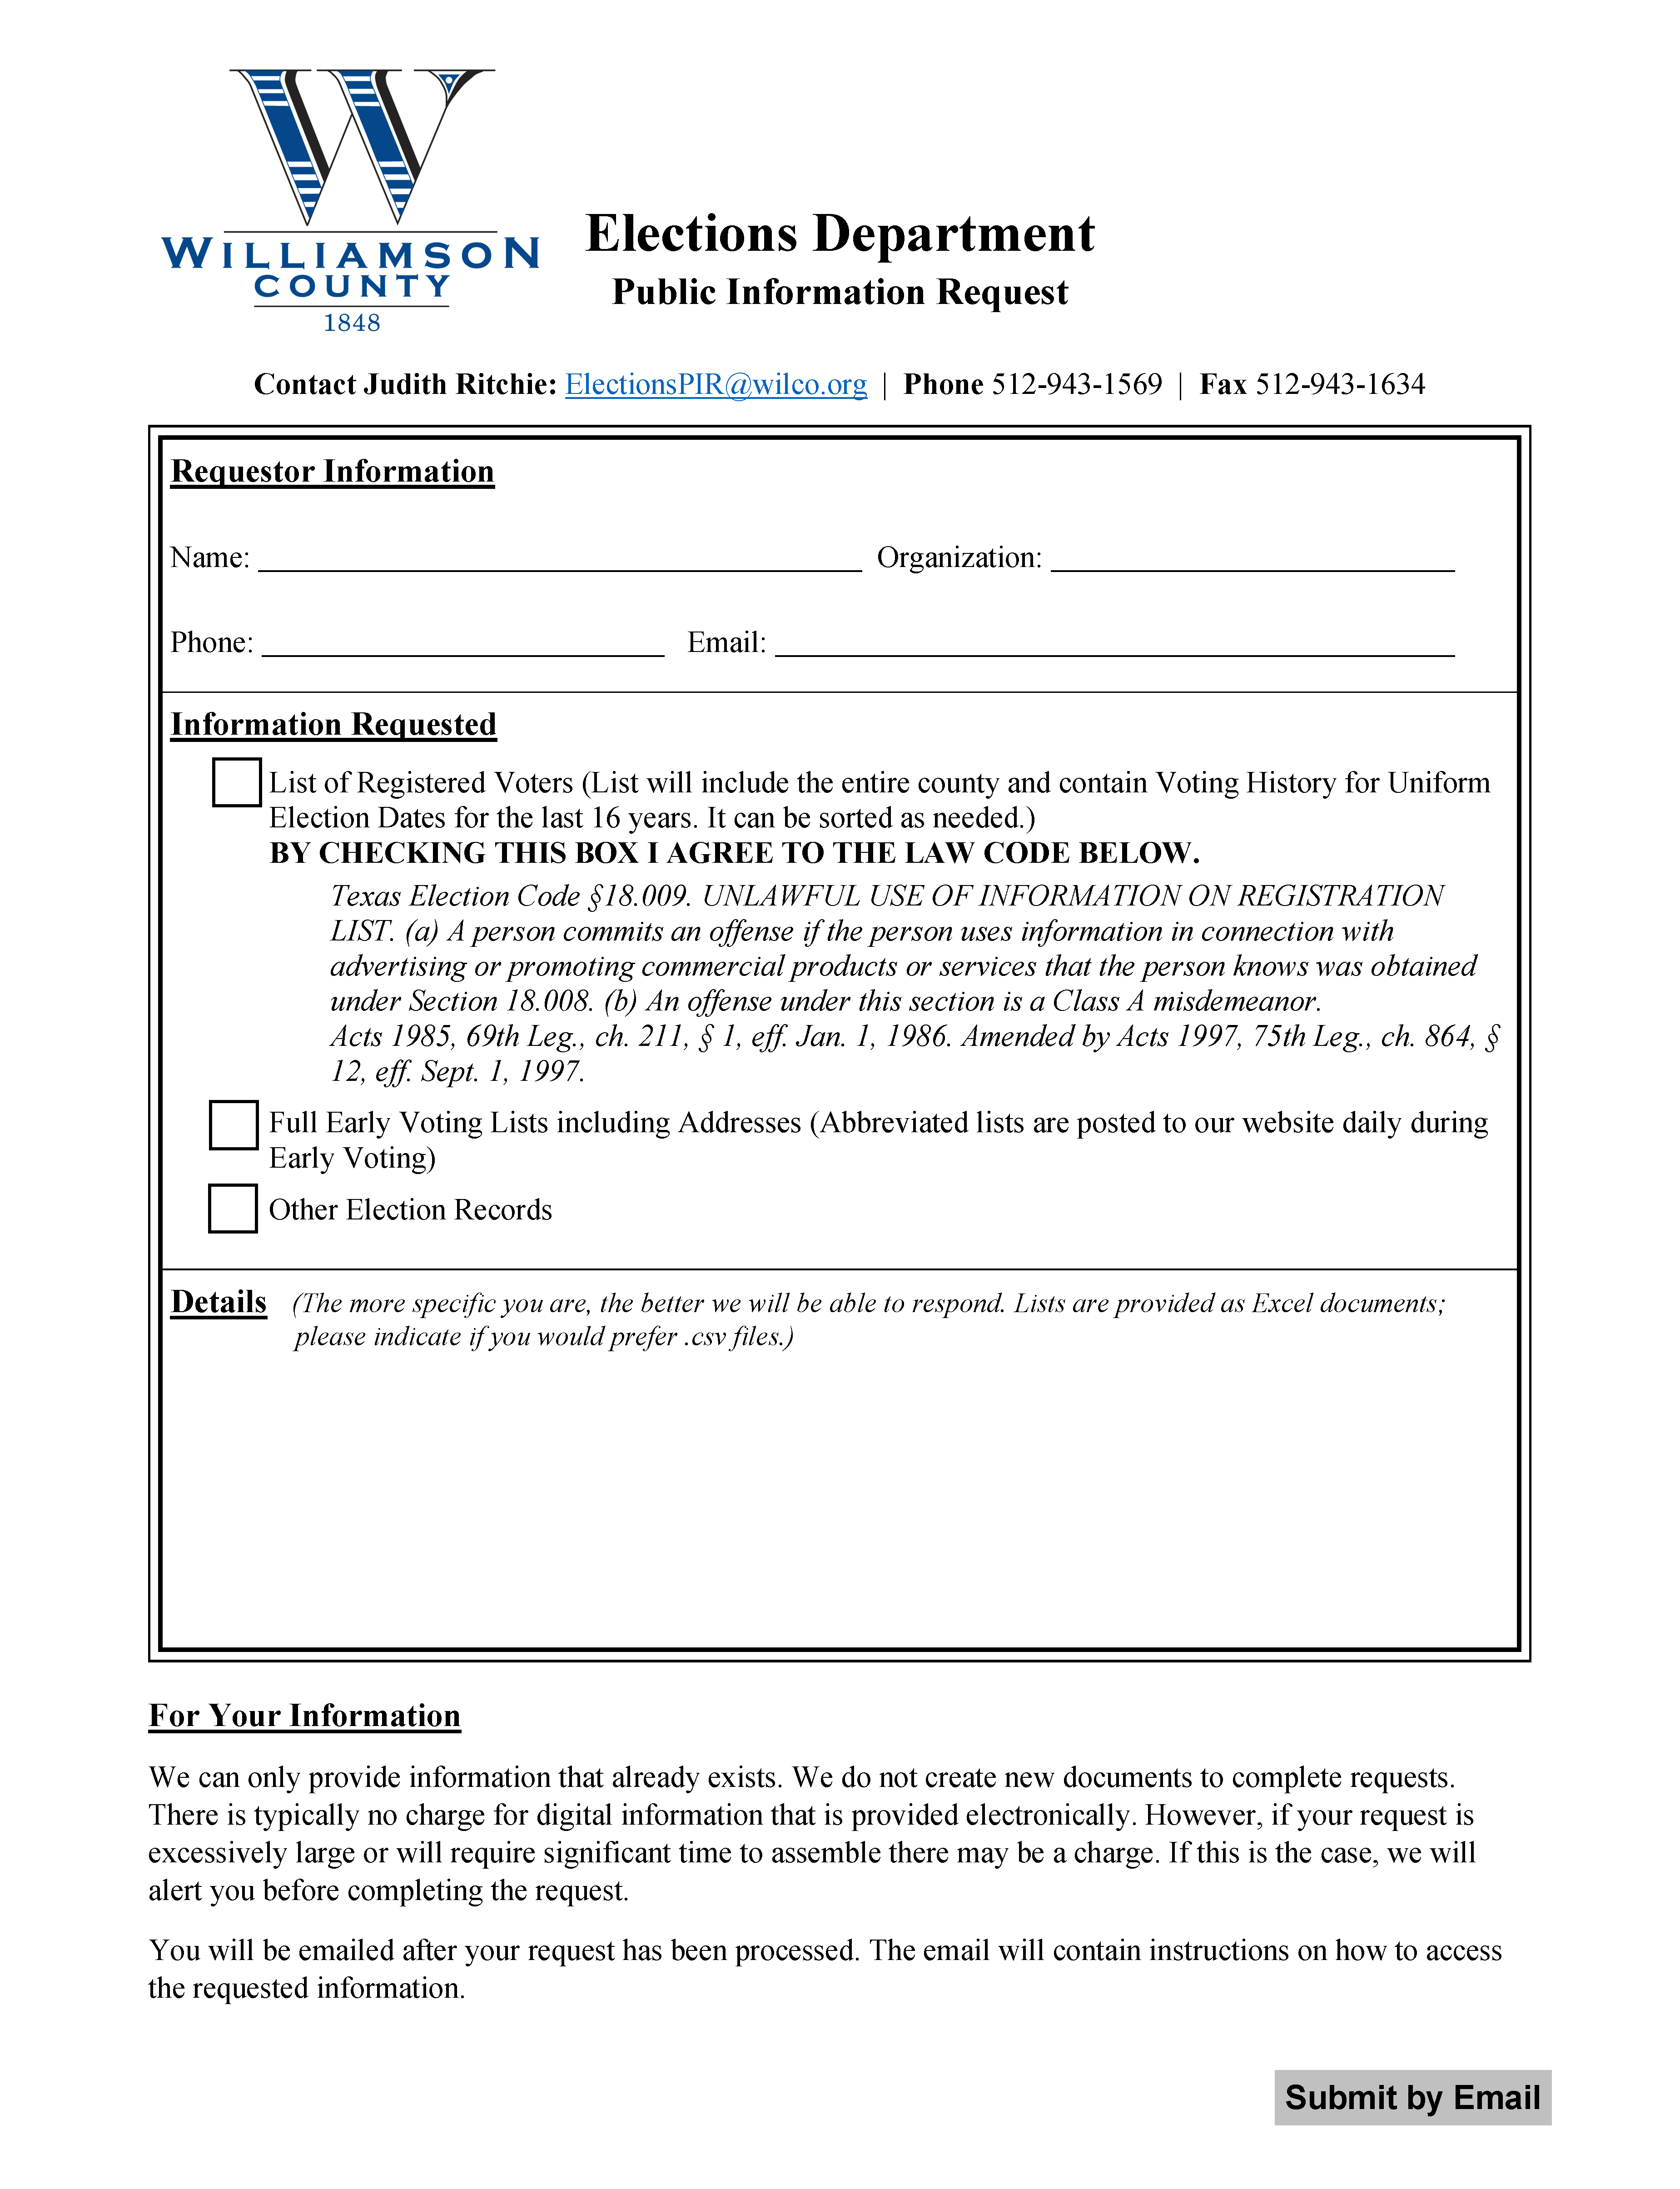 Image of the Request for List of Registered Voters form